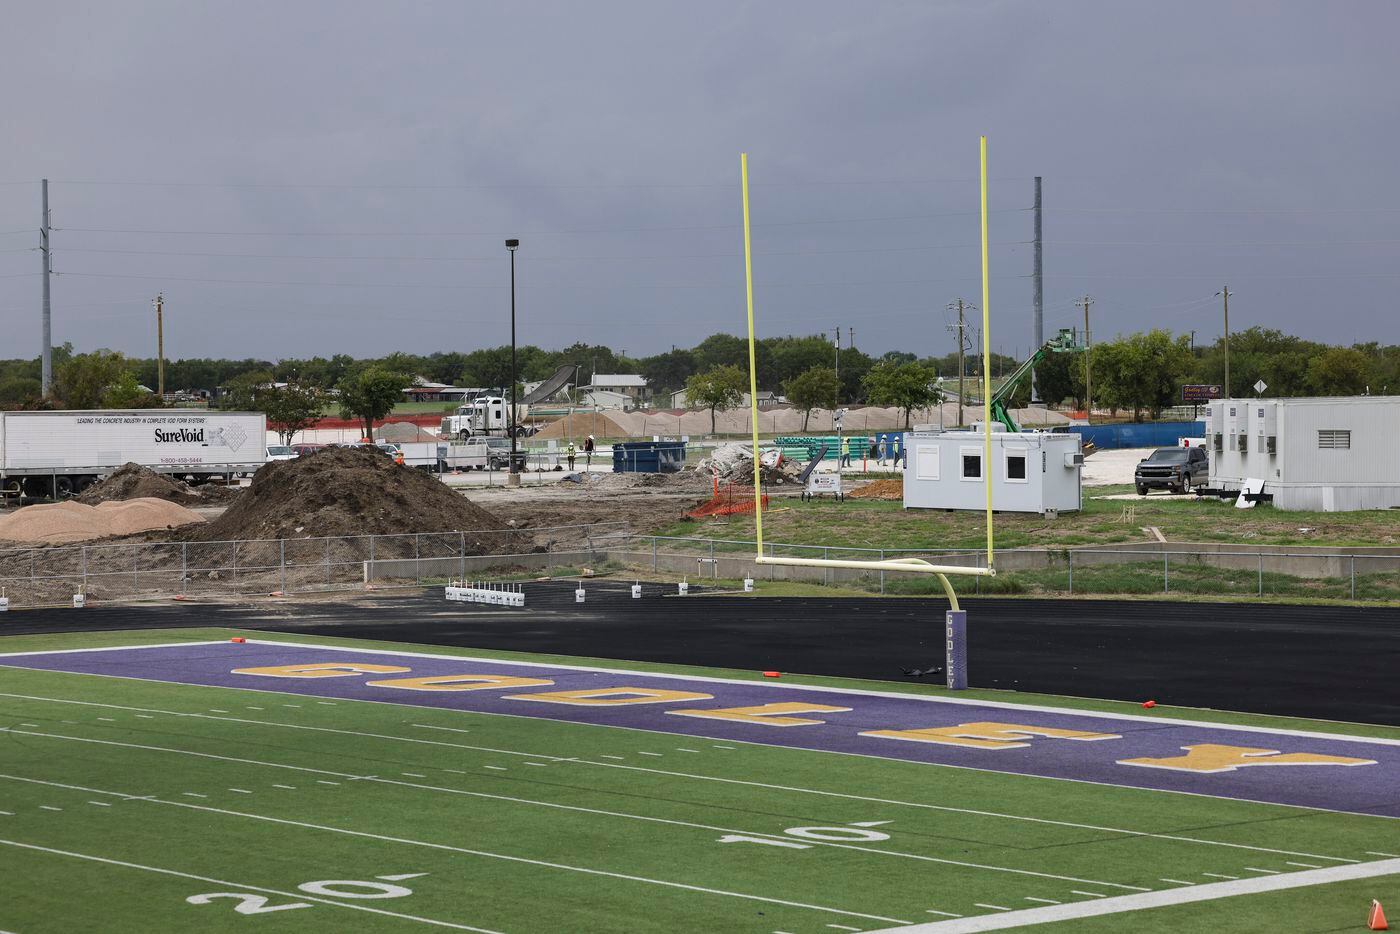 Construction is ongoing behind Wildcat Stadium in Godley.